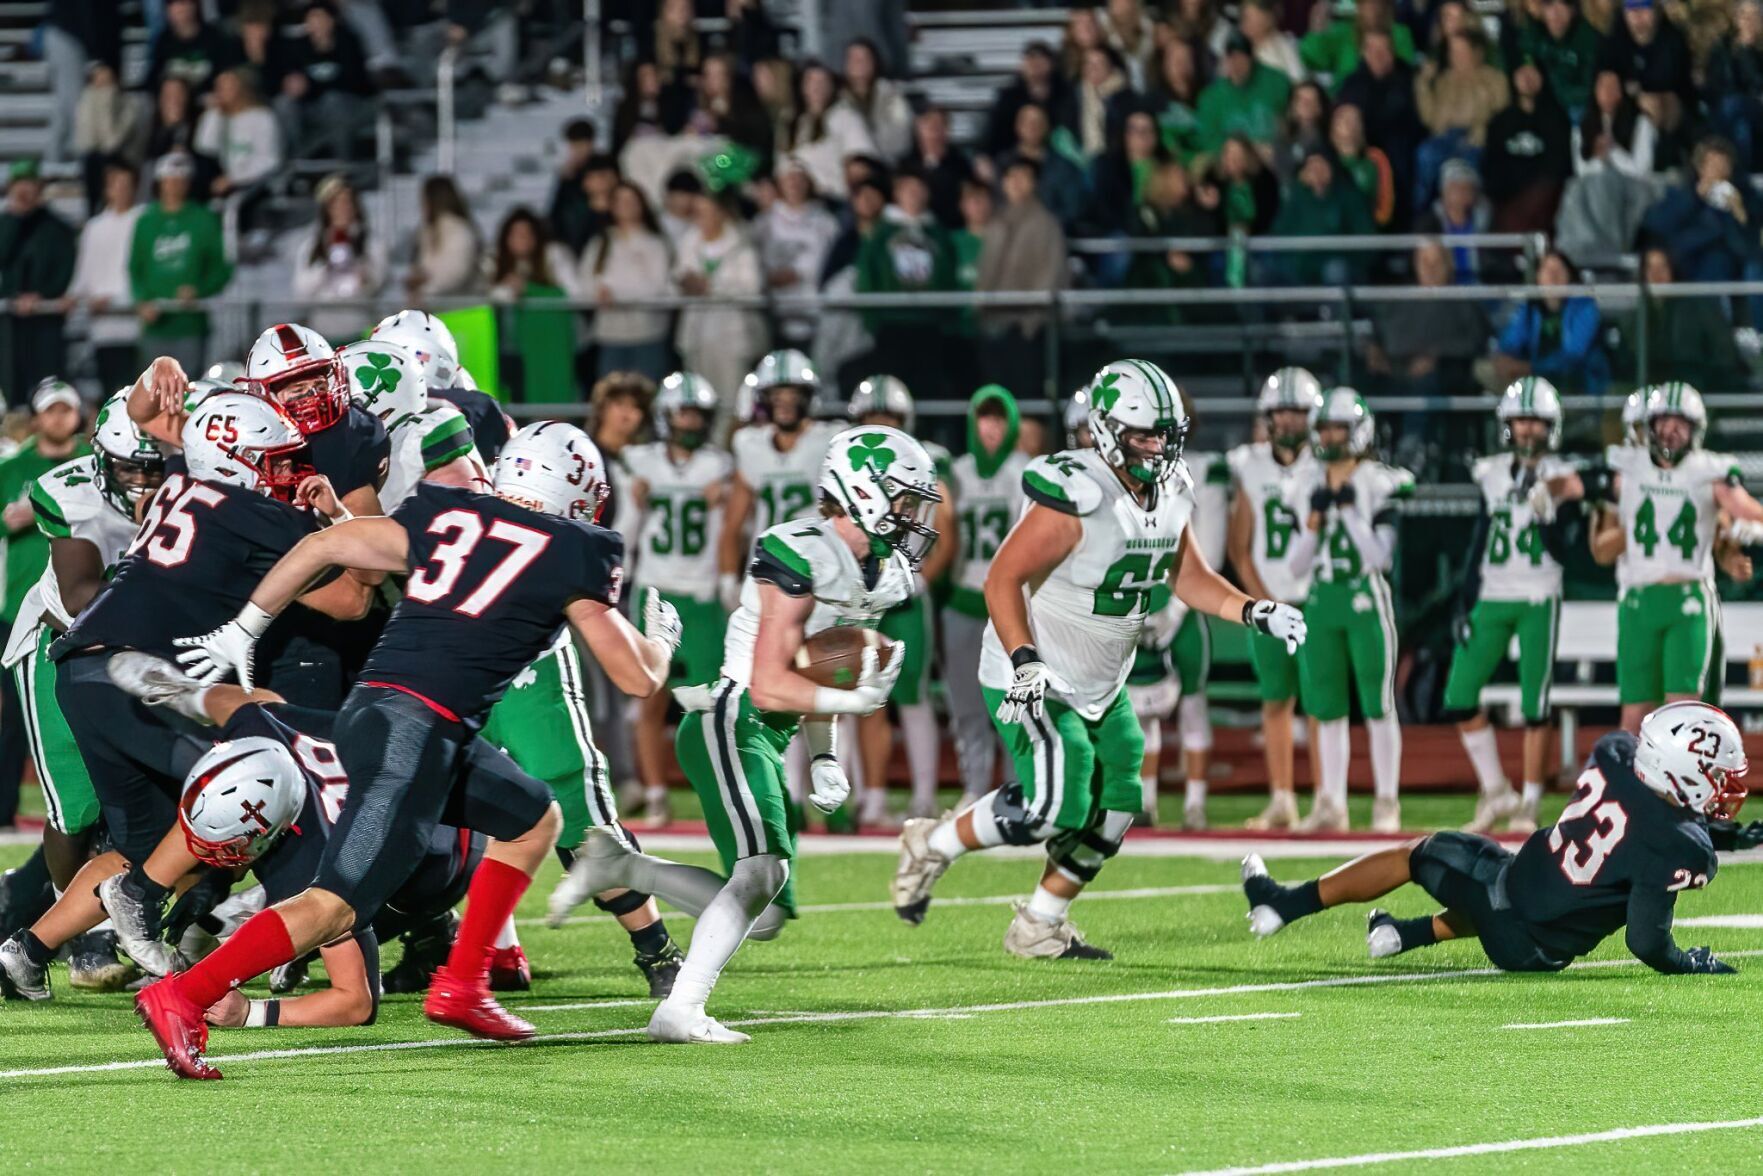 McGuinness Dominates Bishop Kelley in Class 5A Quarterfinals Rematch, Led by J.P. Spanier’s 149-Yard Rushing Stunner